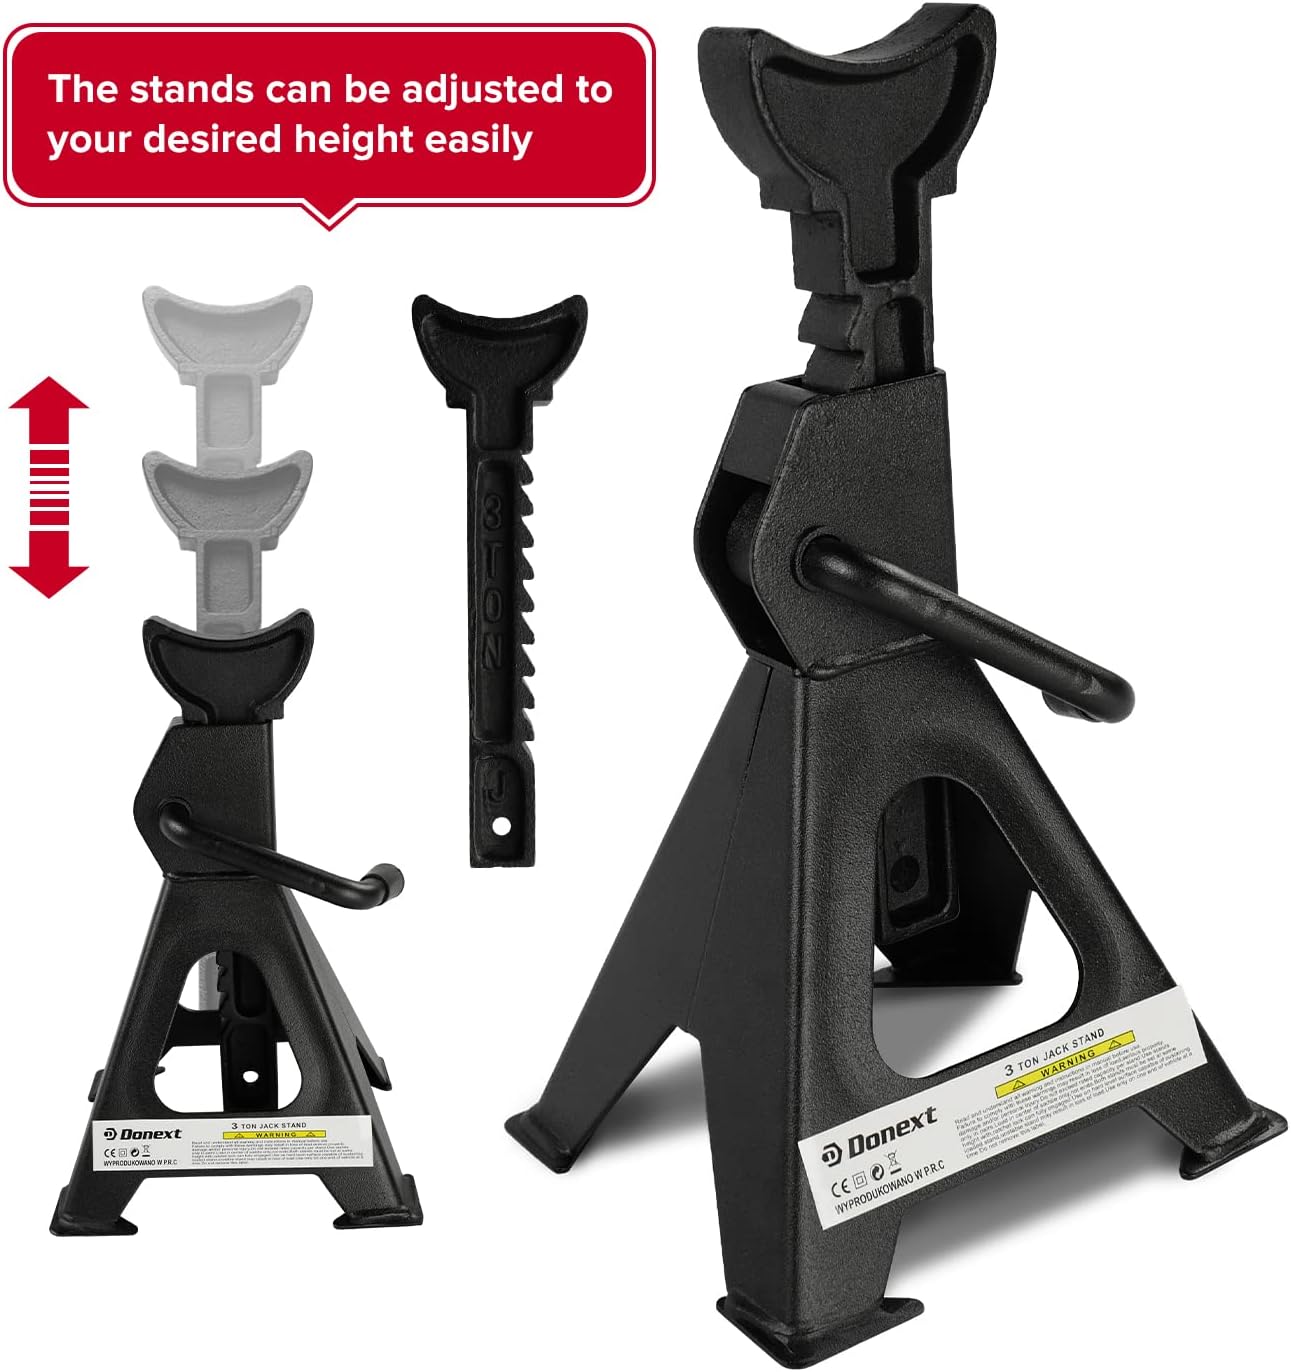 Donext 3 Ton Capacity Steel Jack Stand 1 Pair Black Jack Stands